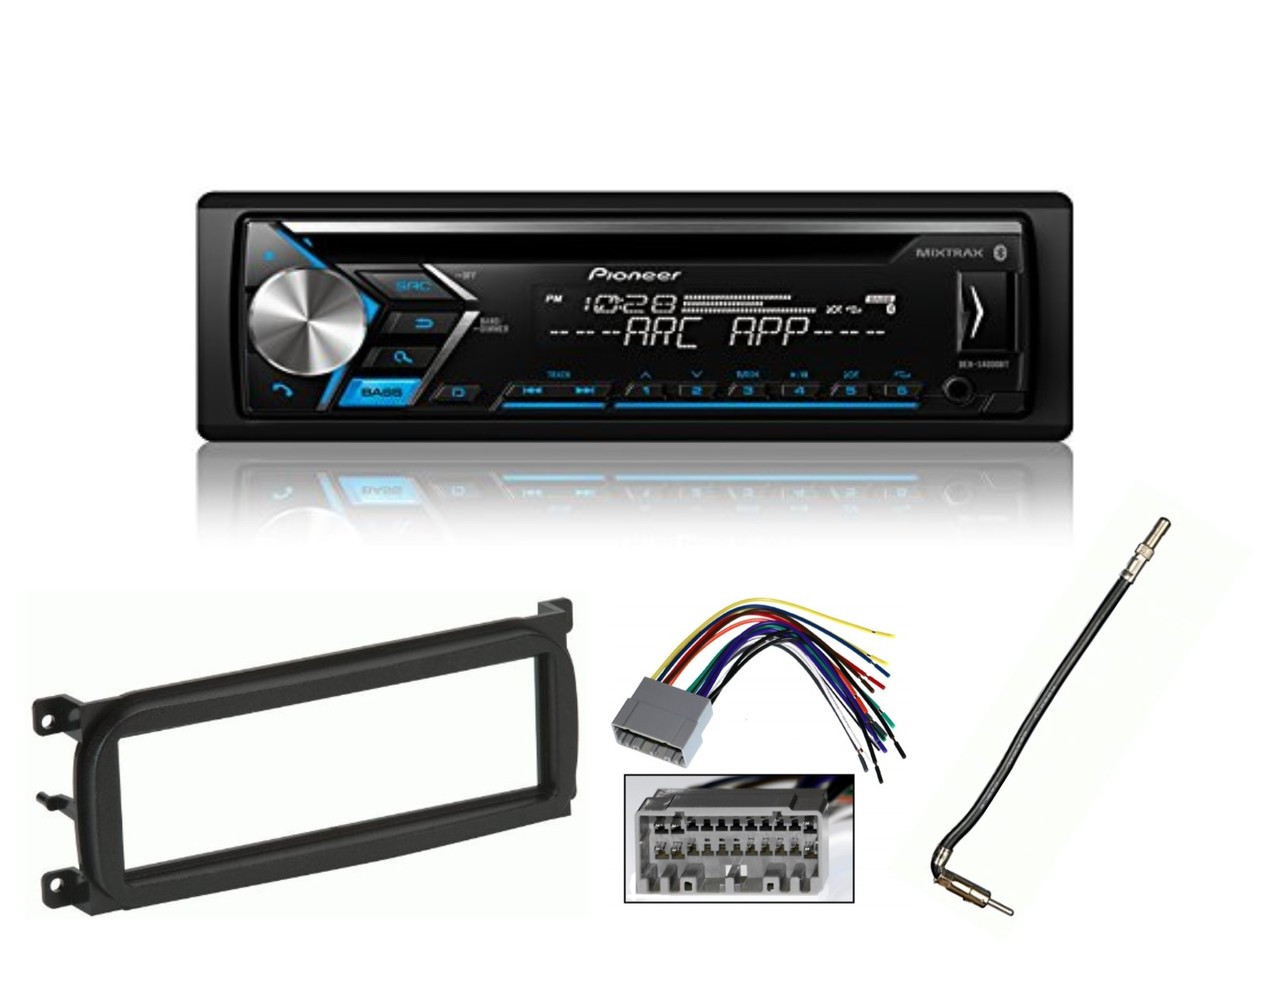 Pioneer DEH-S4000BT Bluetooth CD Car Stereo Audio Receiver - Bundle Combo W/Metra Dash Kit For 1998-Up Chrysler/Dodge/Jeep Vehicles + Antenna Adapter Cable + Radio Wiring Harness + Antenna